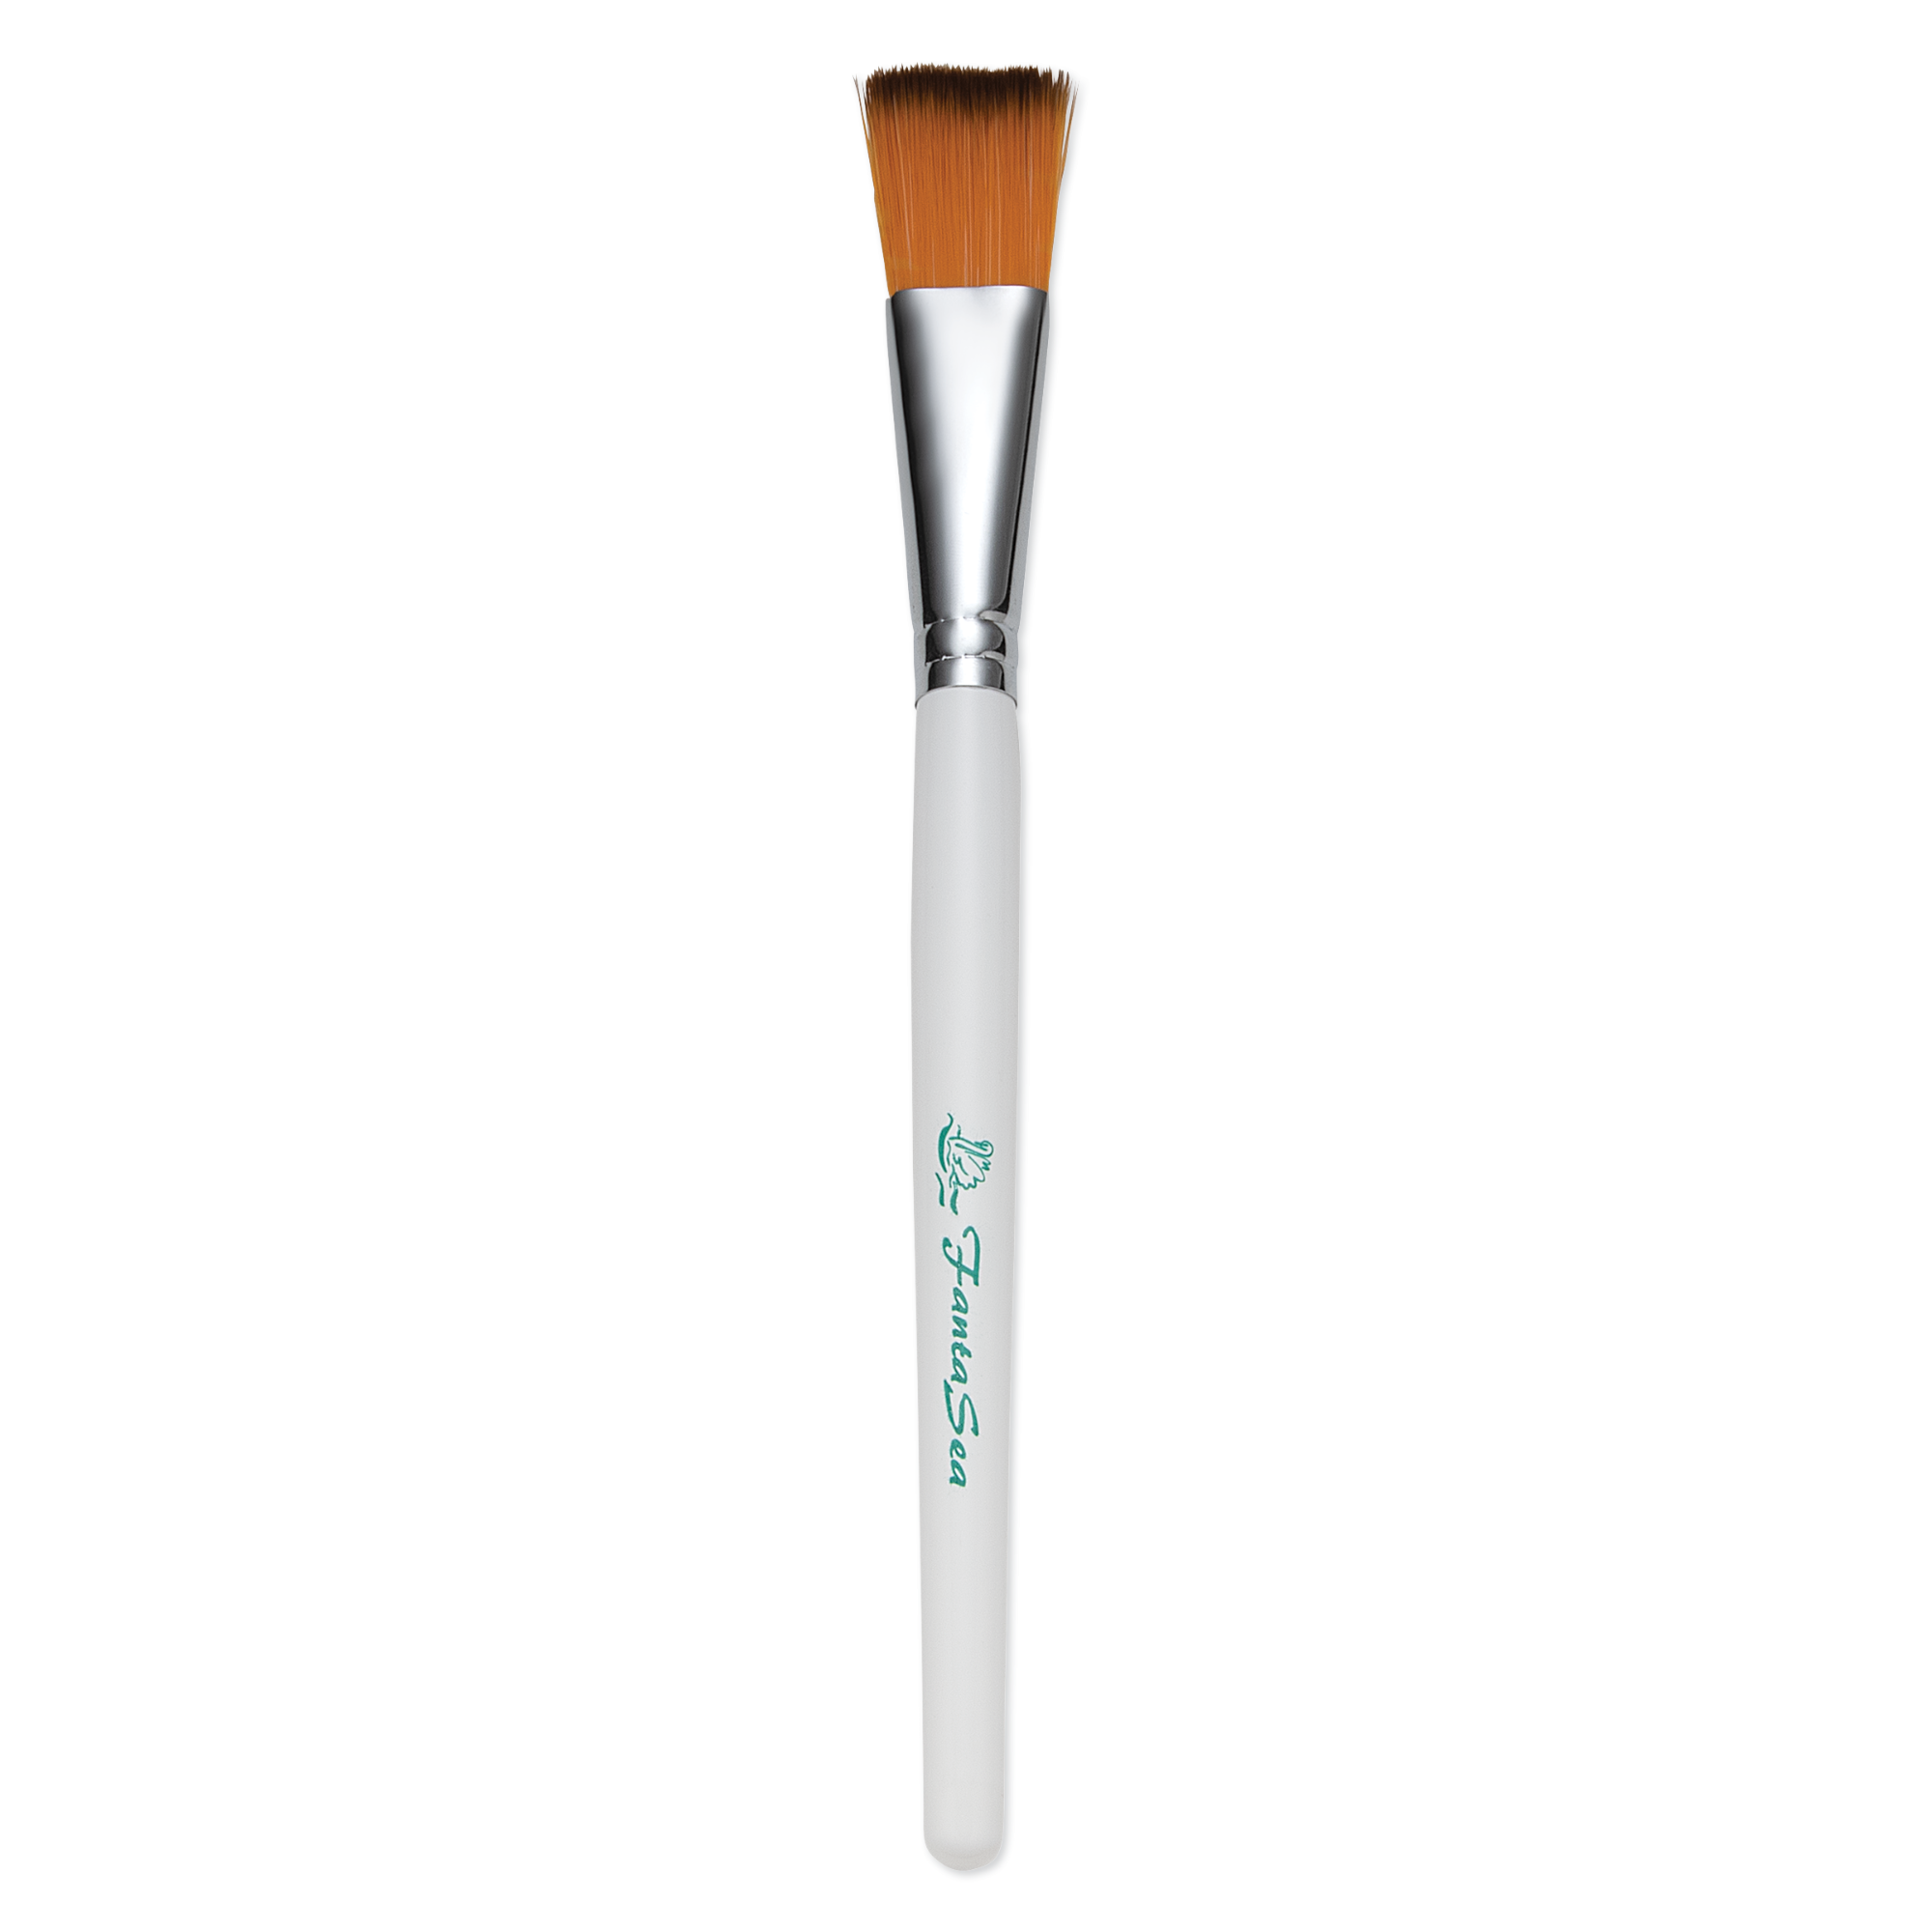 Mask Brush, Synthetic Bristles - Small